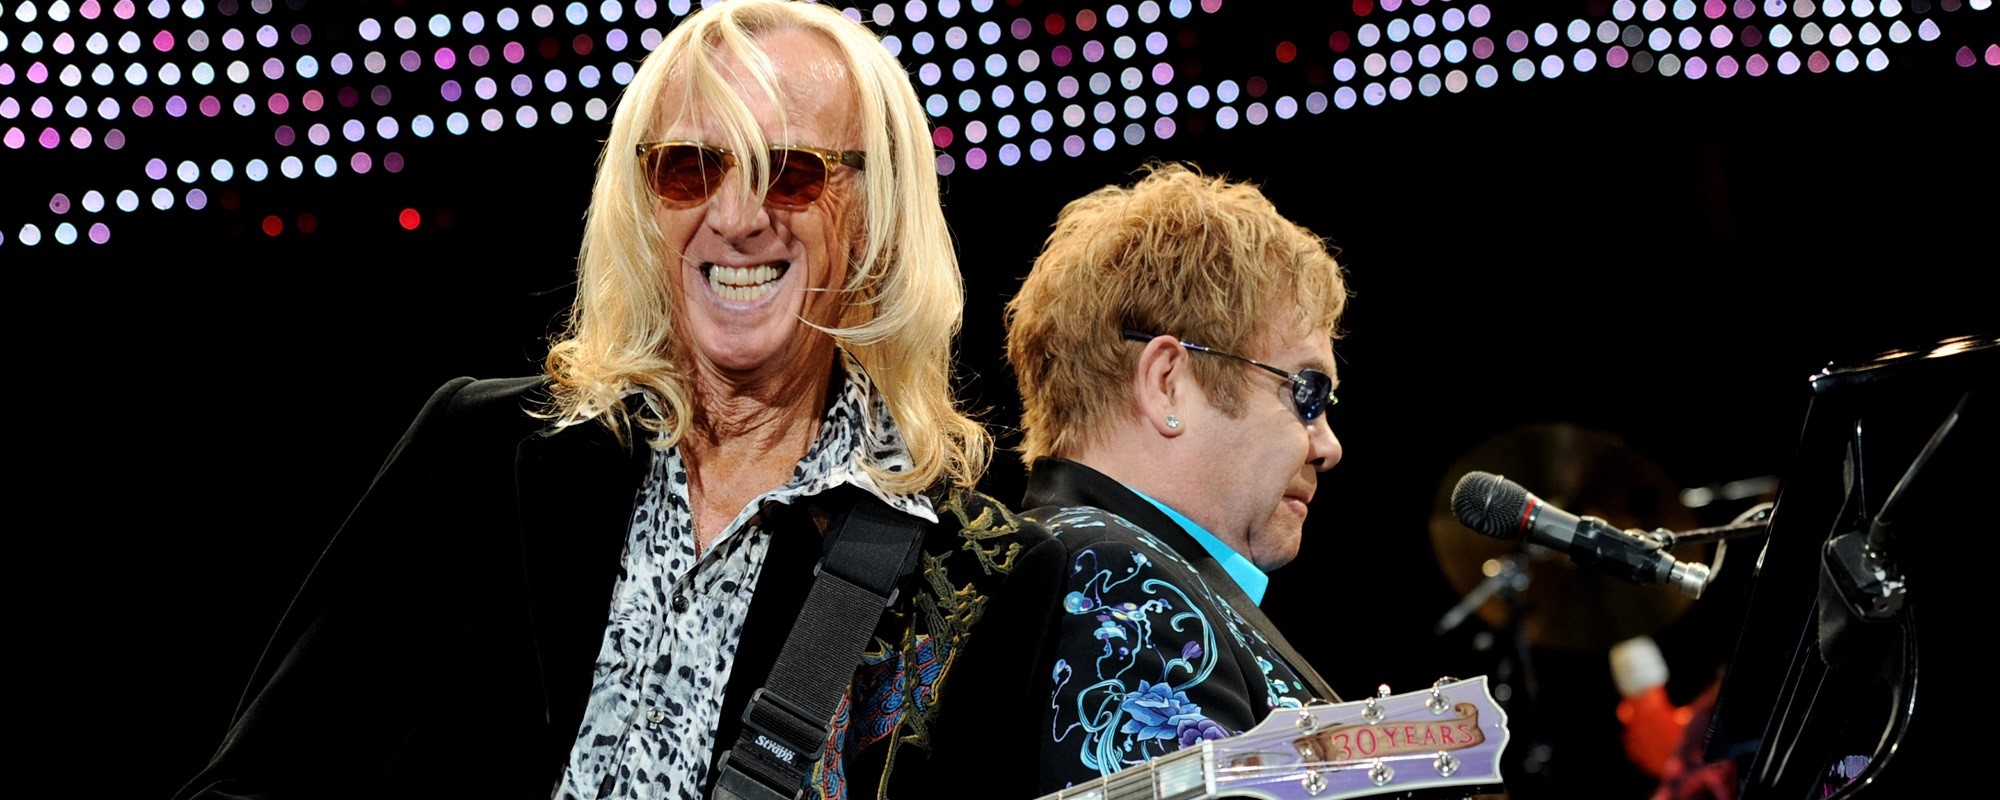 5 Songs Featuring Elton John Guitarist Davey Johnstone by Artists Other than Elton